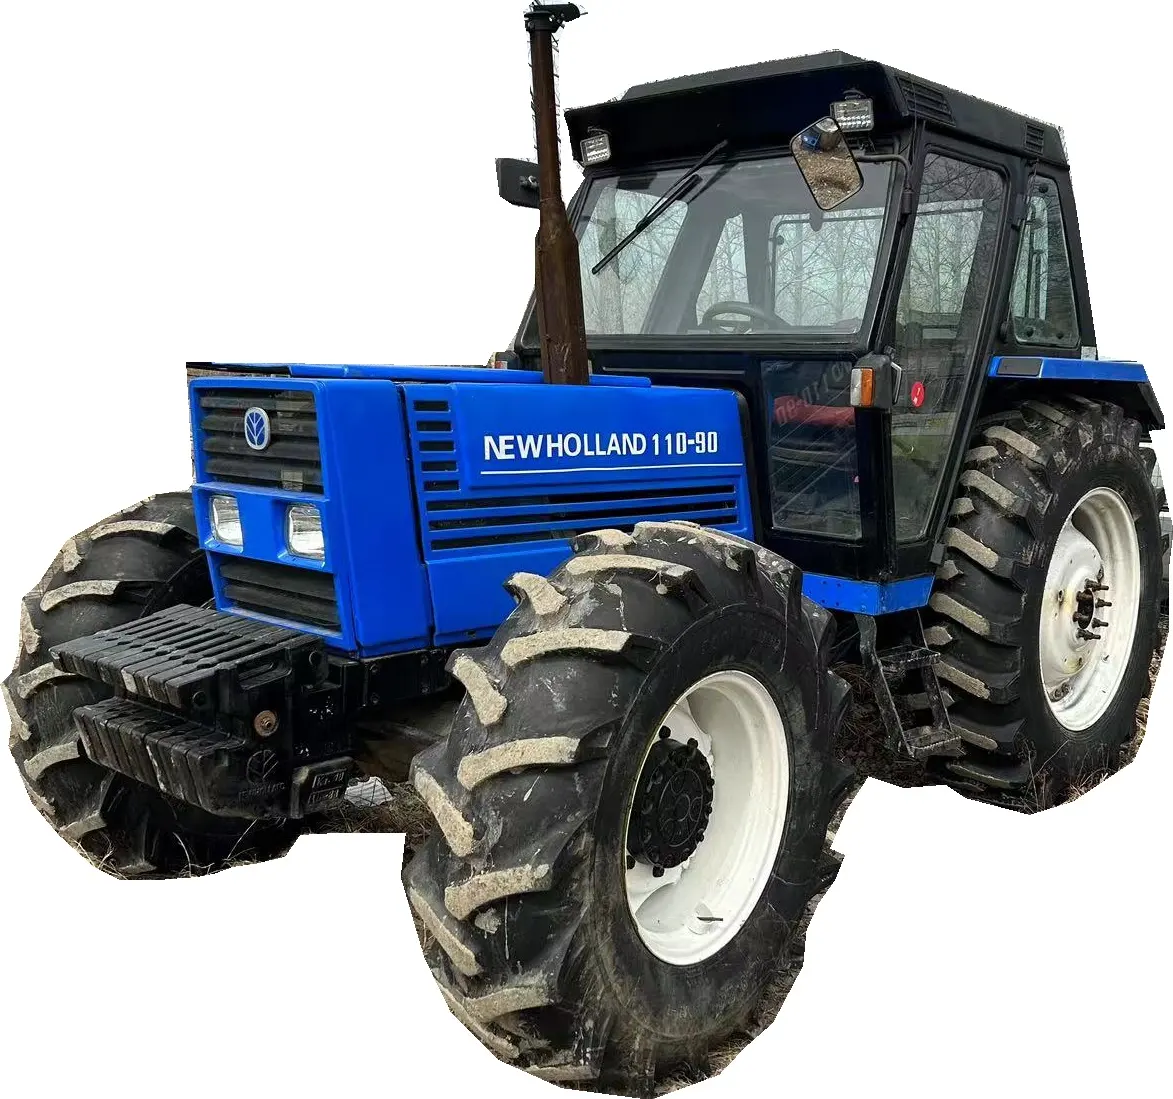 FIAT NEW and HOLLAND 100-90 110-90 100hp 110hp used tractor with new front end loader and backhoe